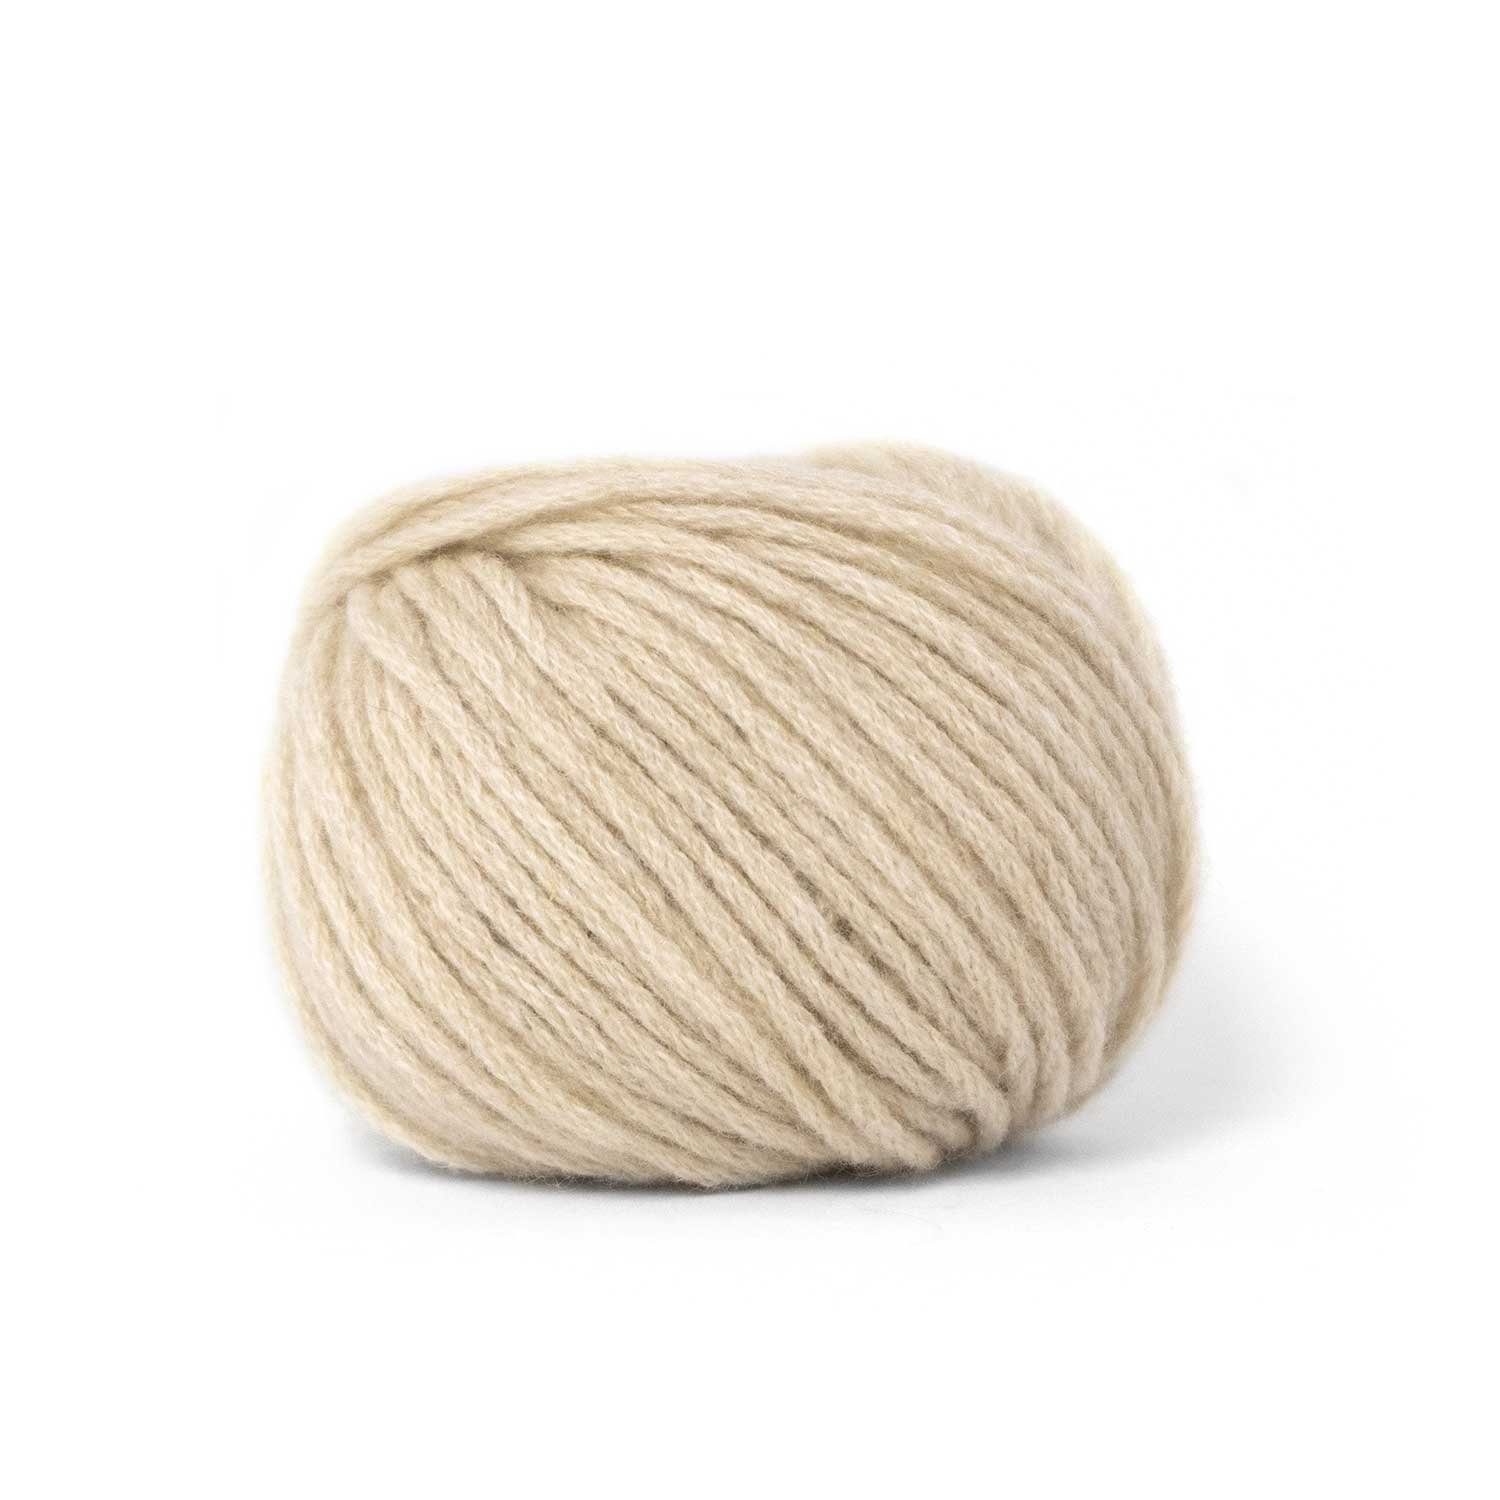 ORGANIC CASHMERE WORSTED | 100% ORGANIC CASHMERE WOOL